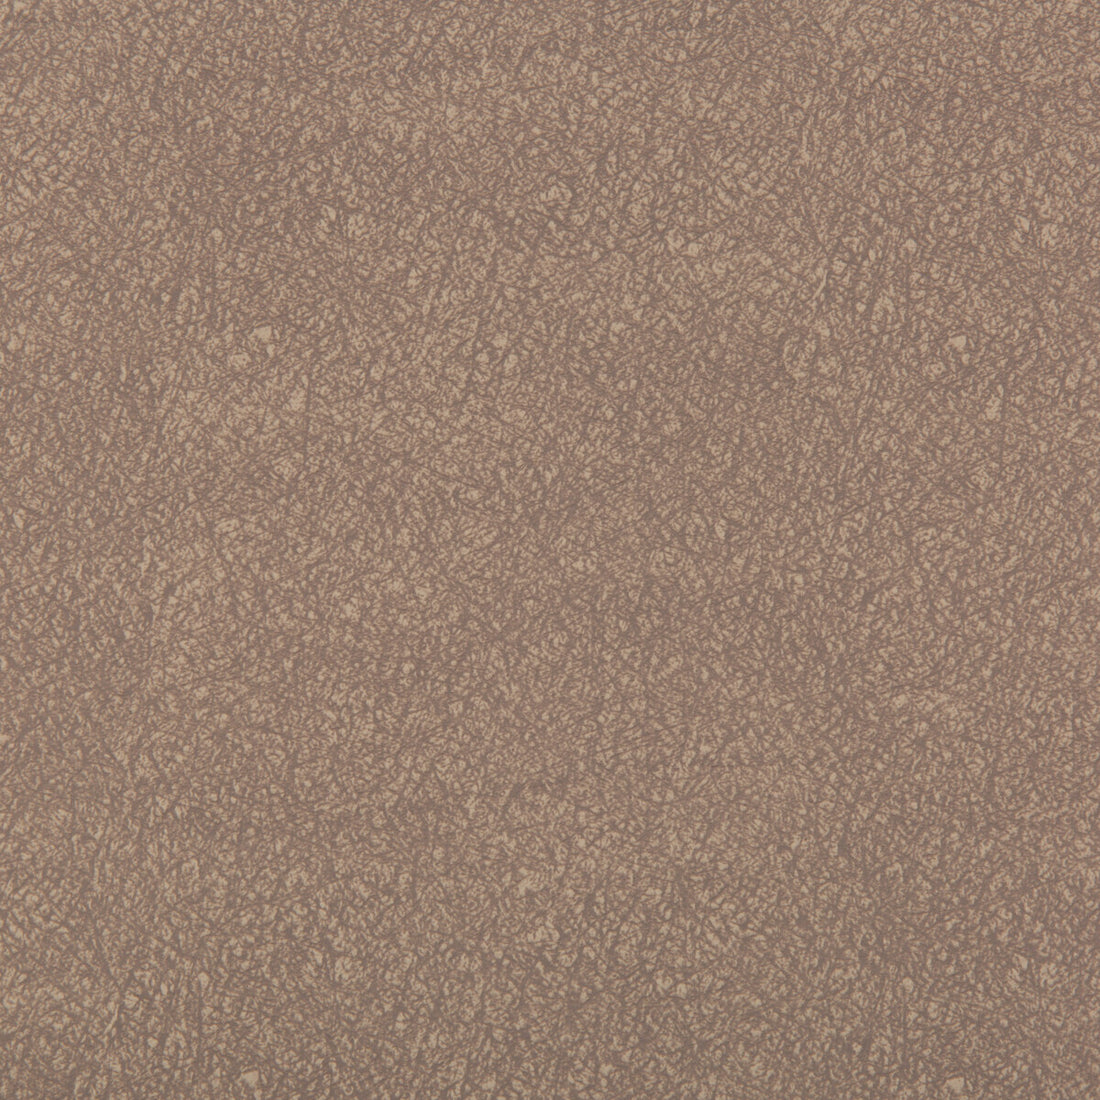 Ames fabric in quartz color - pattern AMES.106.0 - by Kravet Contract